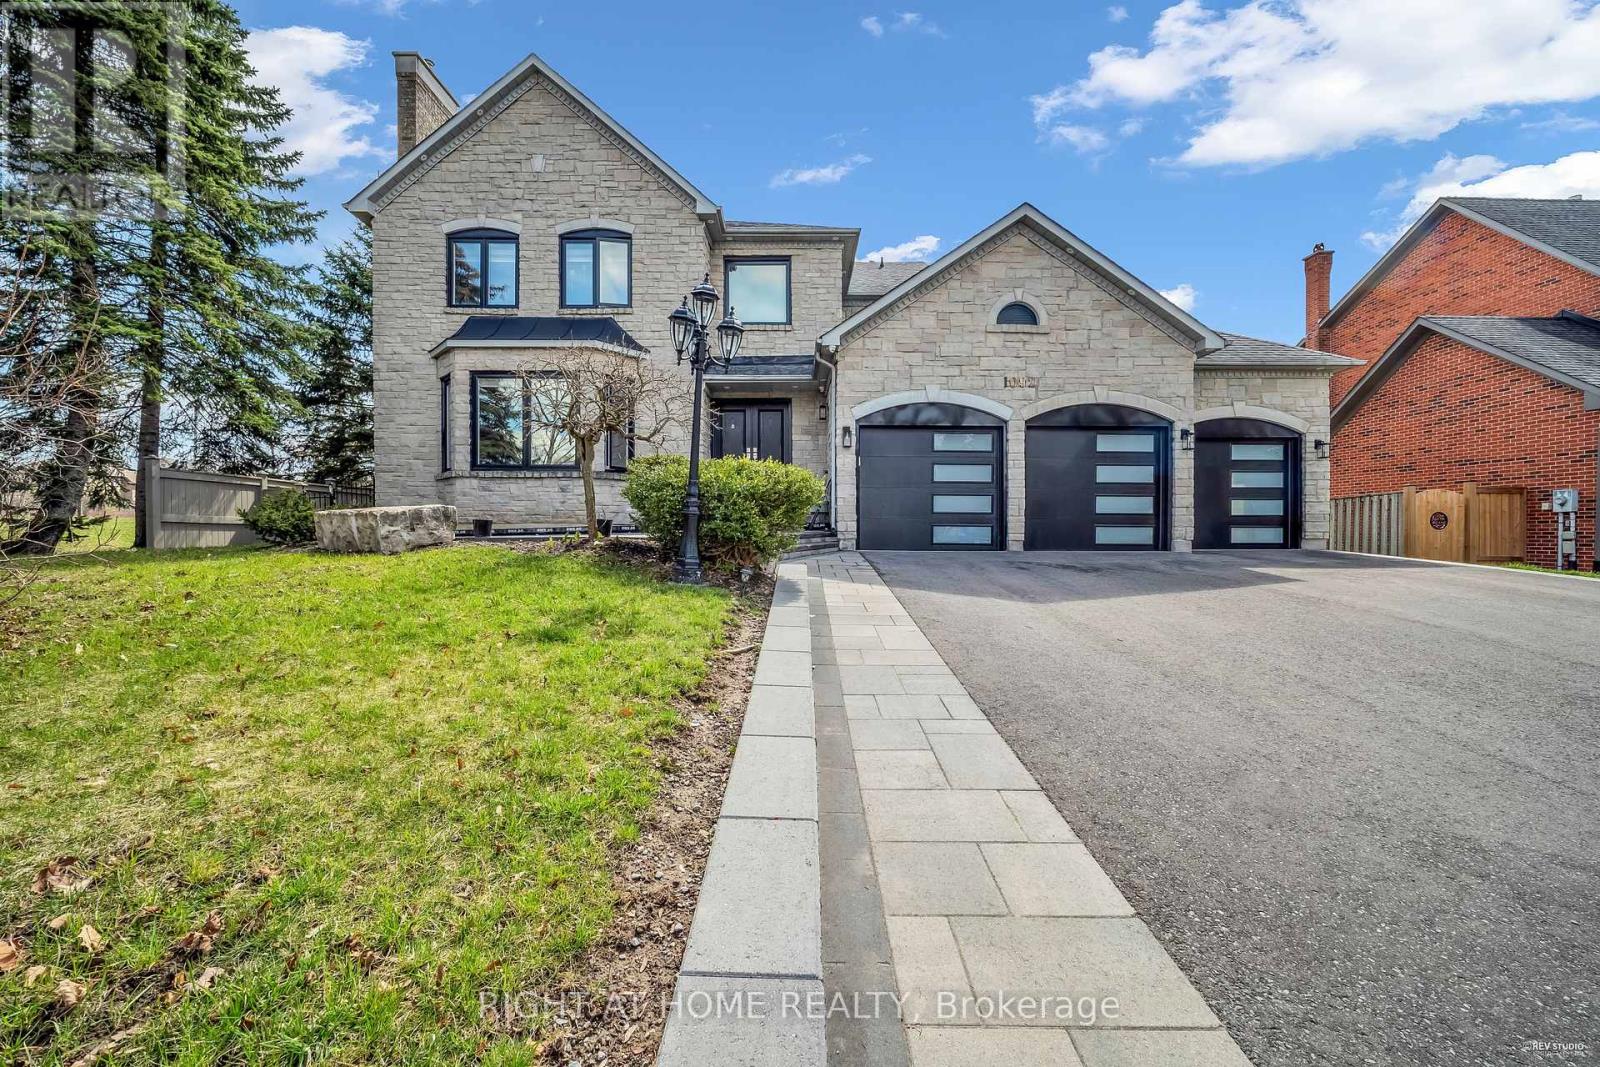 1092 STONEHAVEN AVE located in Newmarket, Ontario